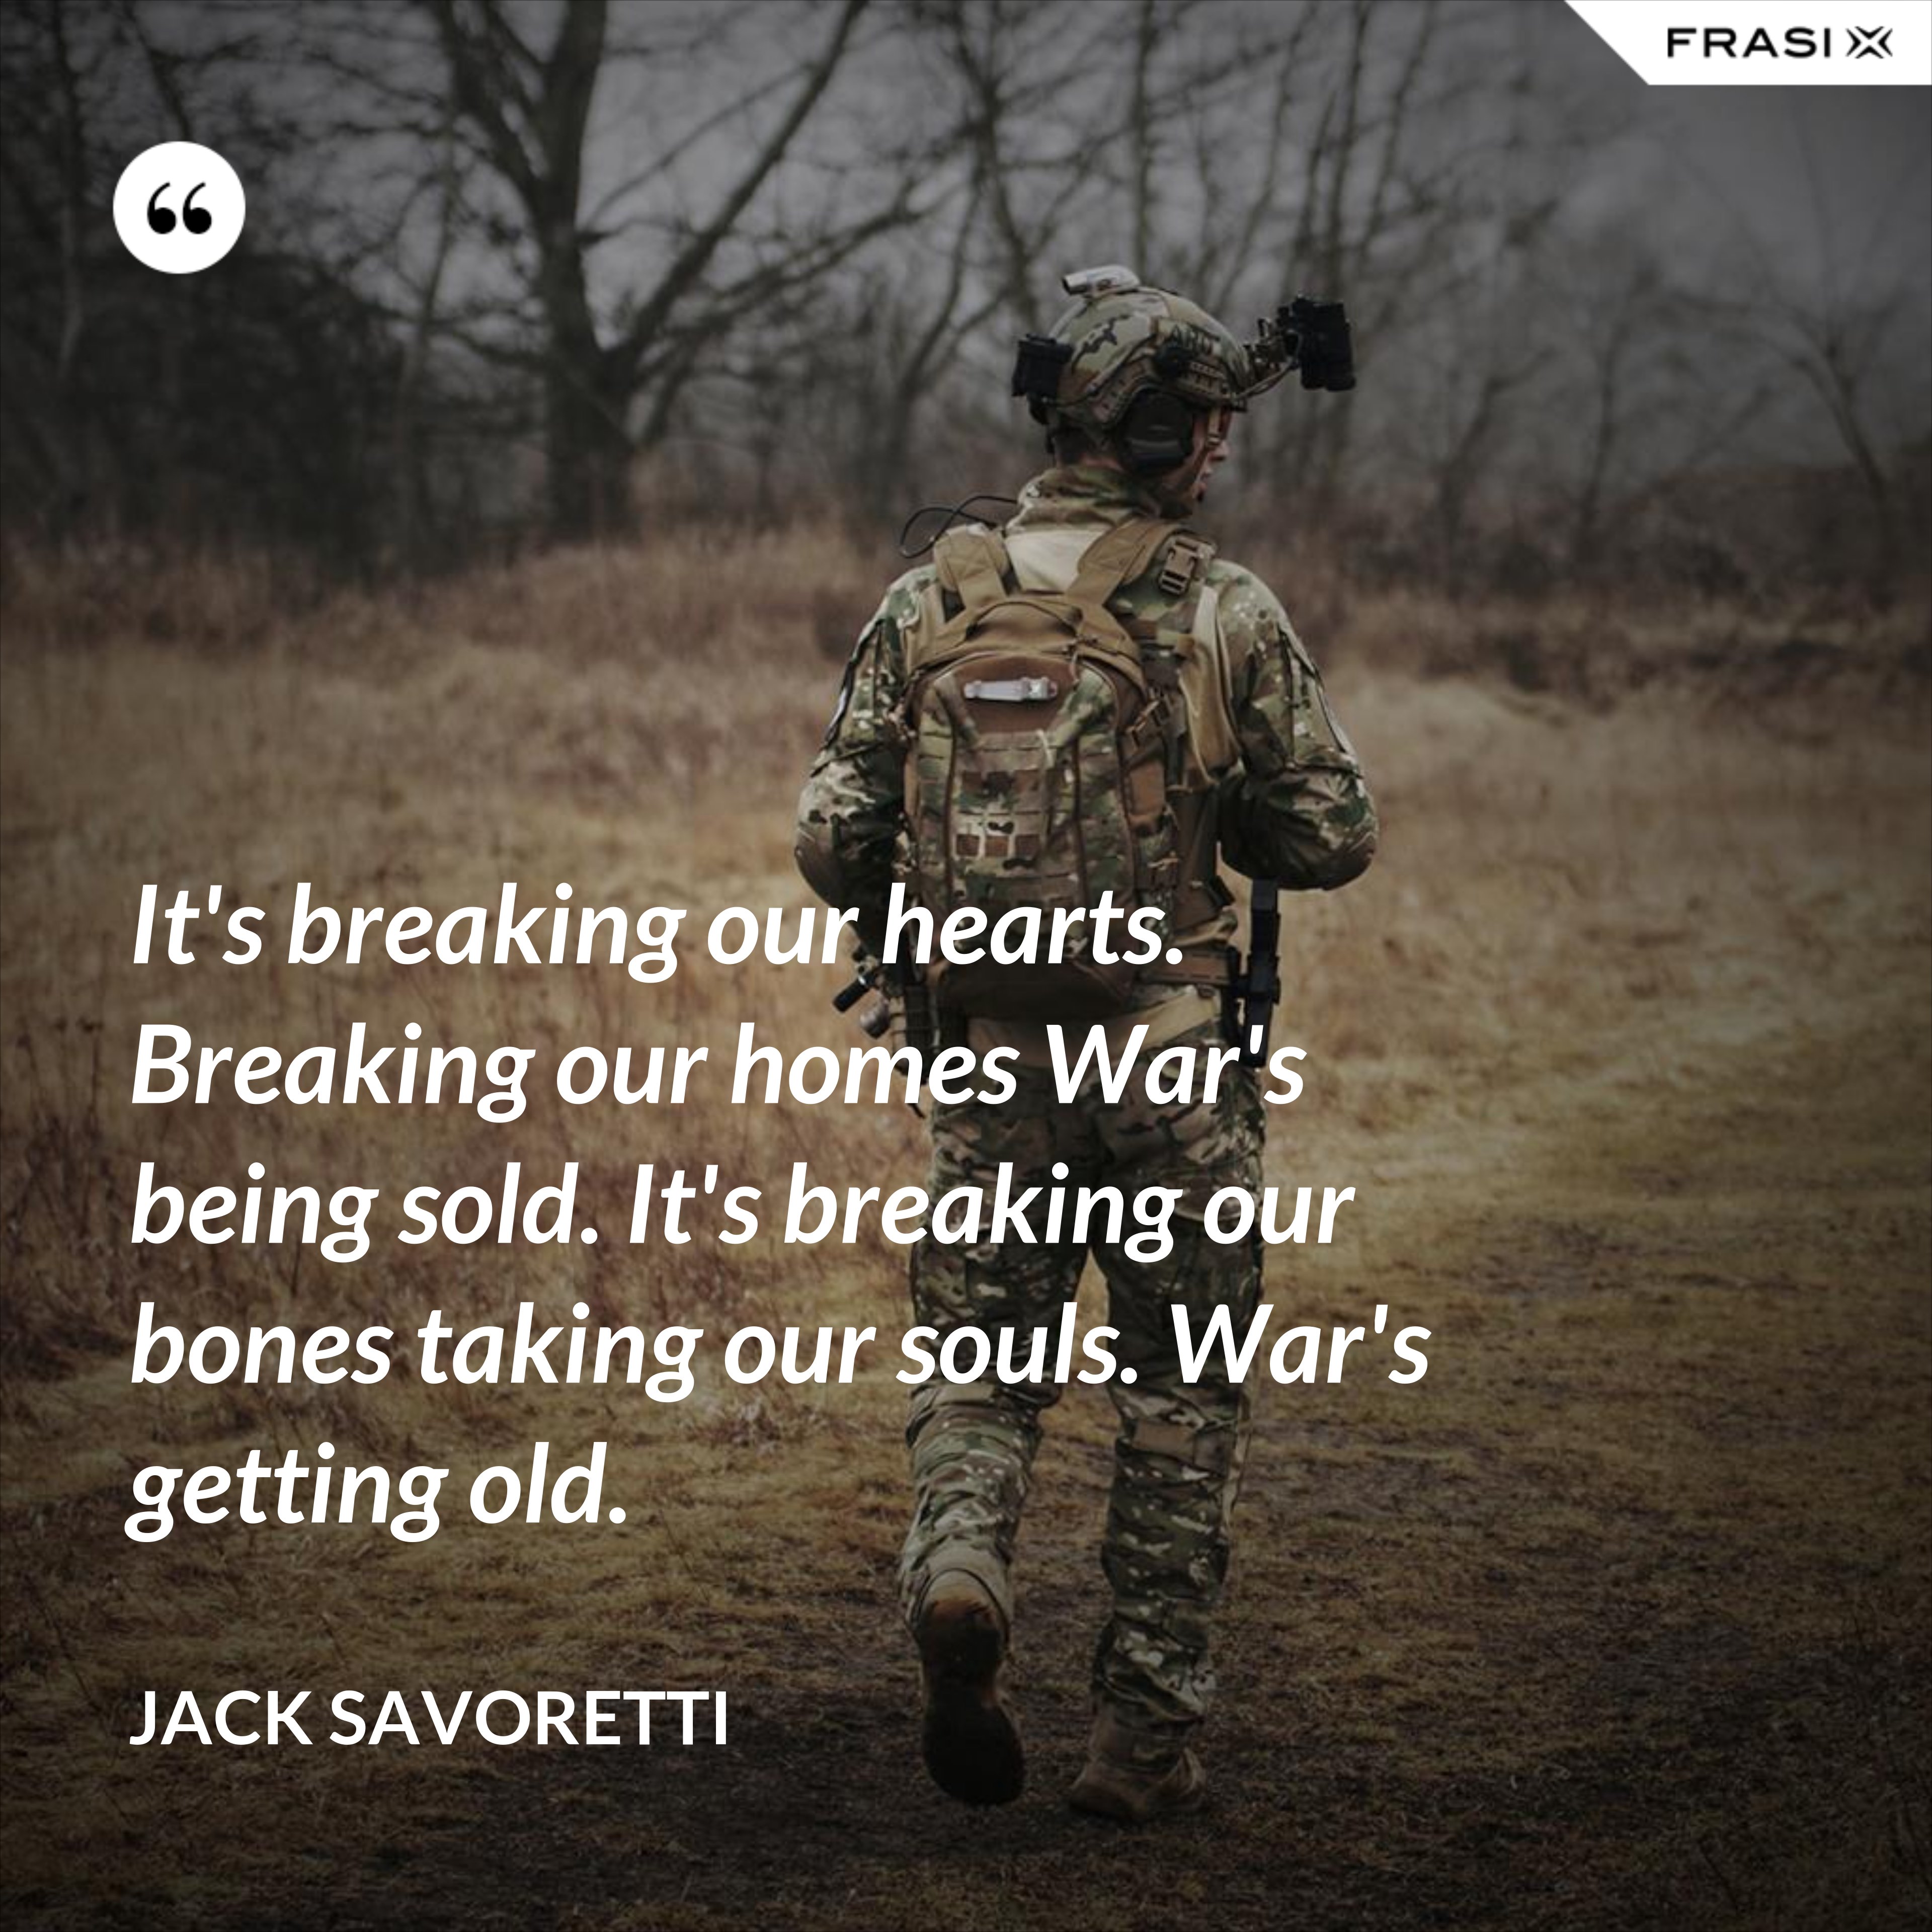 It's breaking our hearts. Breaking our homes War's being sold. It's breaking our bones taking our souls. War's getting old. - Jack Savoretti